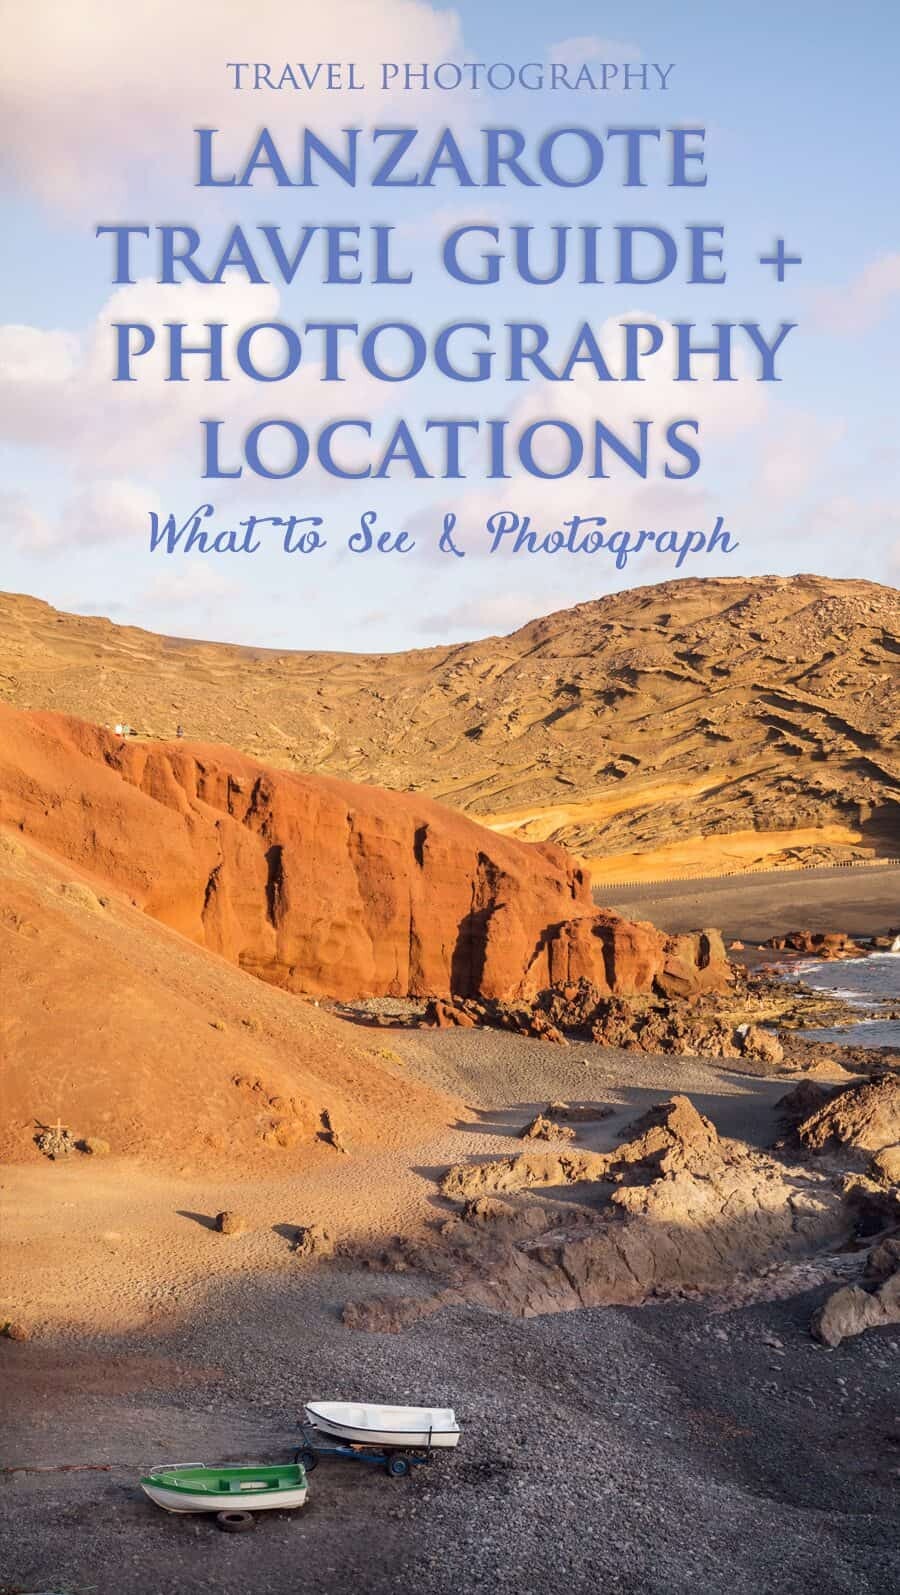 Lanzarote Photography Locations and Travel Guide, a list of the most beautiful places on Lanzarote and where to stay.